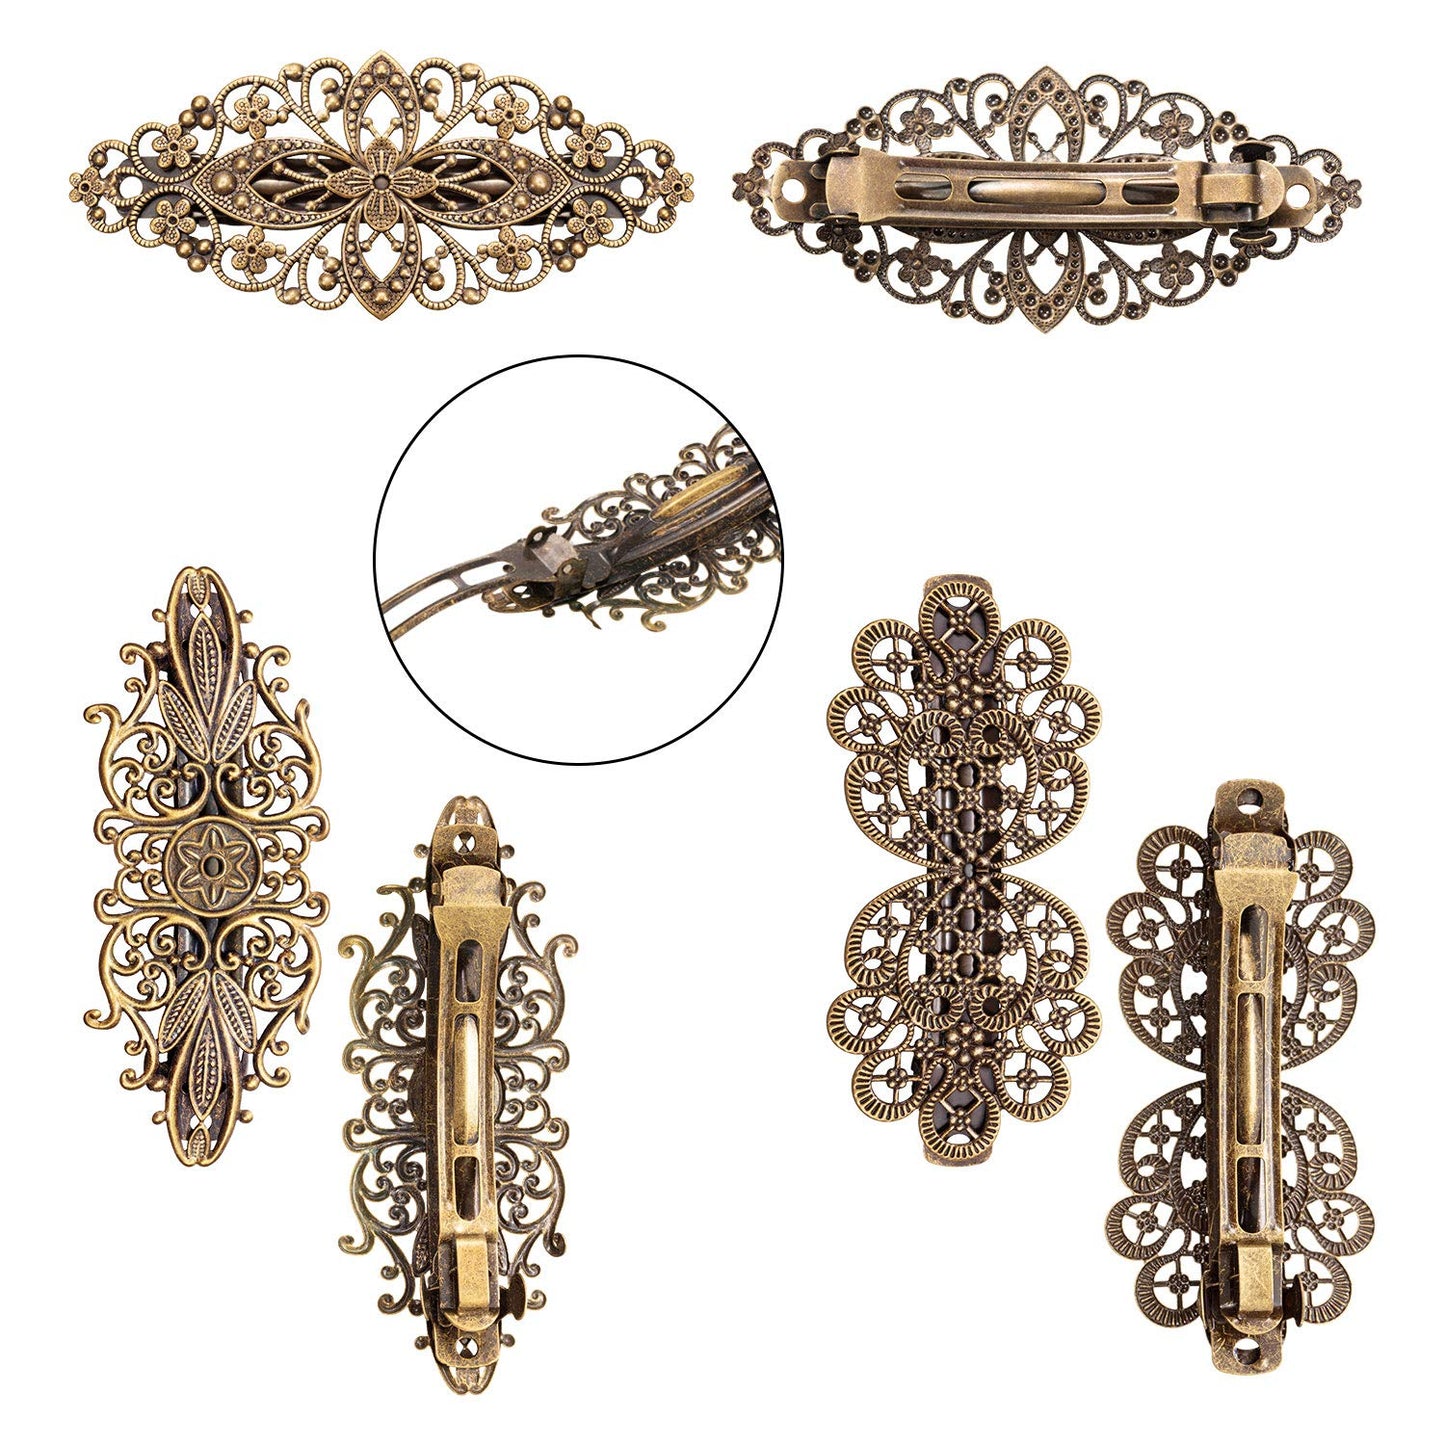 6 Pieces Vintage Hair Barrettes/ Clips for Women Retro French flower Metal Bronze Girl Hair Styling Pins/ Accessories